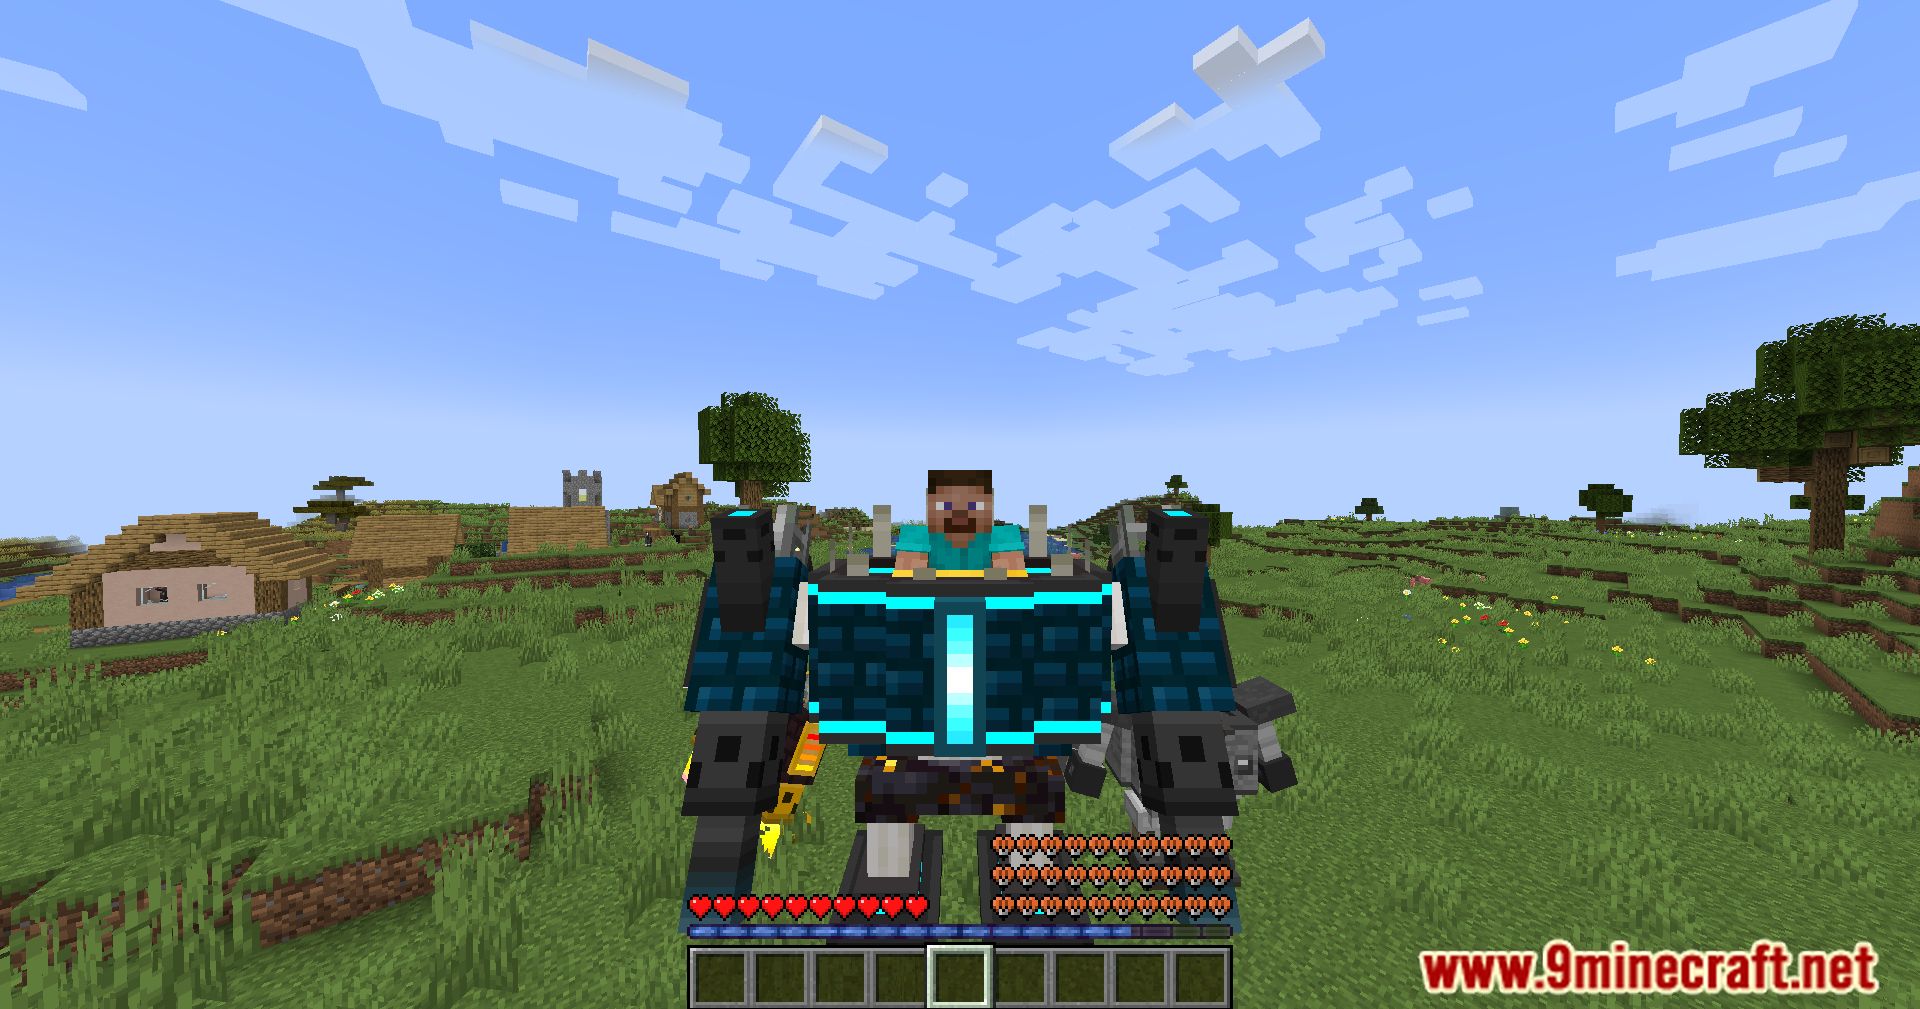 Armored Redstone Mod (1.20.1, 1.19.3) - Forge Your Path With Redstone-Powered Adventures! 18